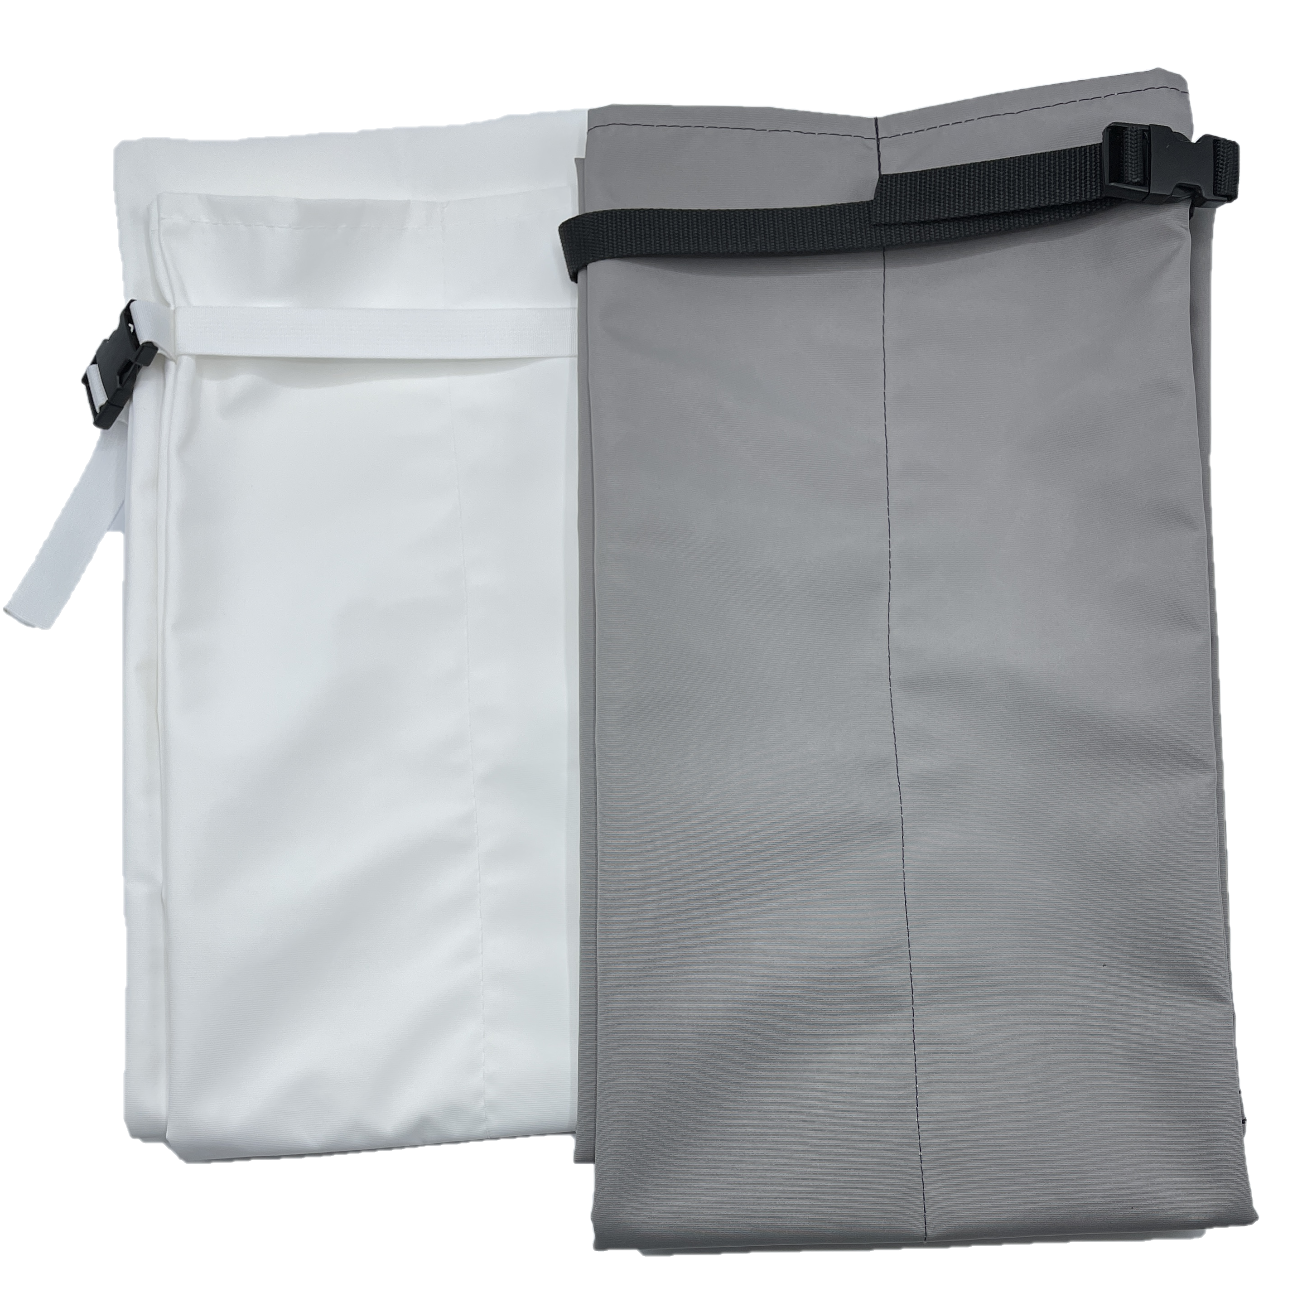 sunfly pole bag in weathermax SG white and charcoal 